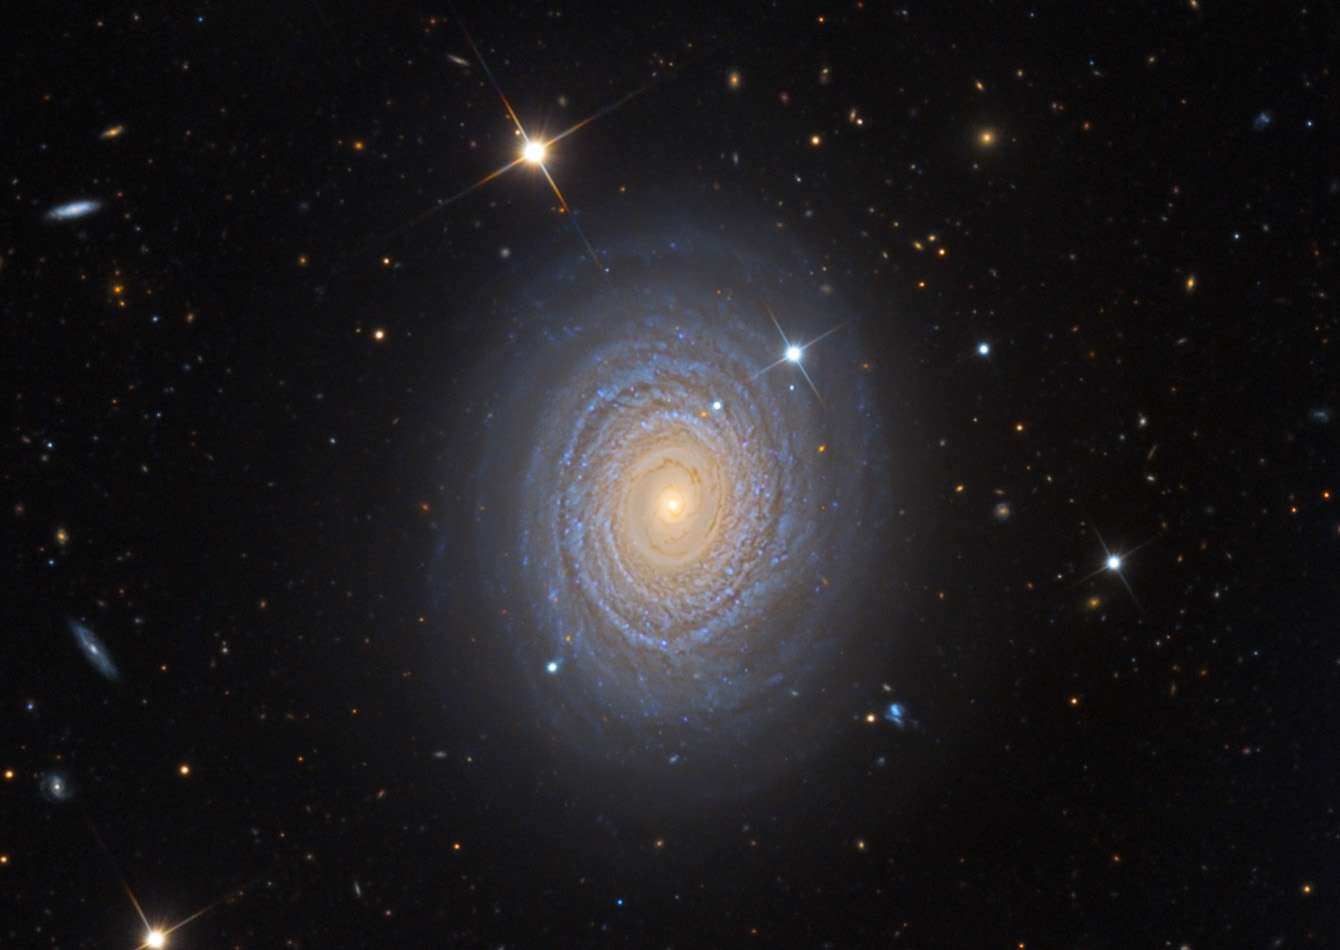 Spiral galaxies are delicate and subtle things. This one, NGC 488, is 90 million light years away. The photo was captured at the Mount Lemmon SkyCenter in Arizona and released on Oct. 25, 2015.